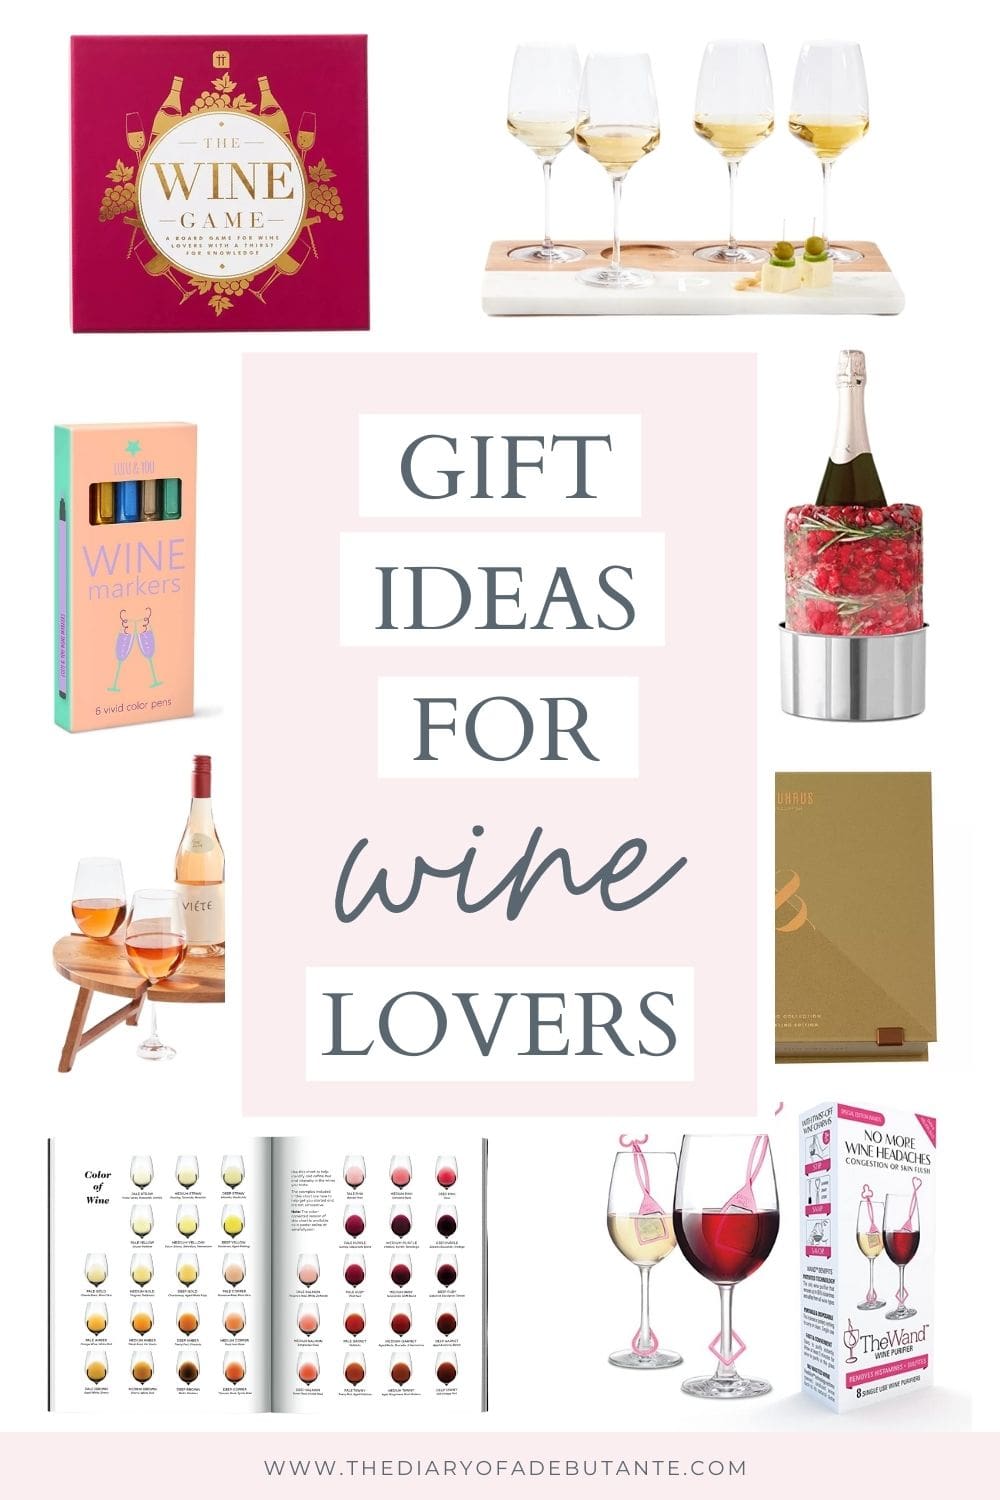 Inexpensive gifts for wine lovers rounded up by blogger Stephanie Ziajka on Diary of a Debutante